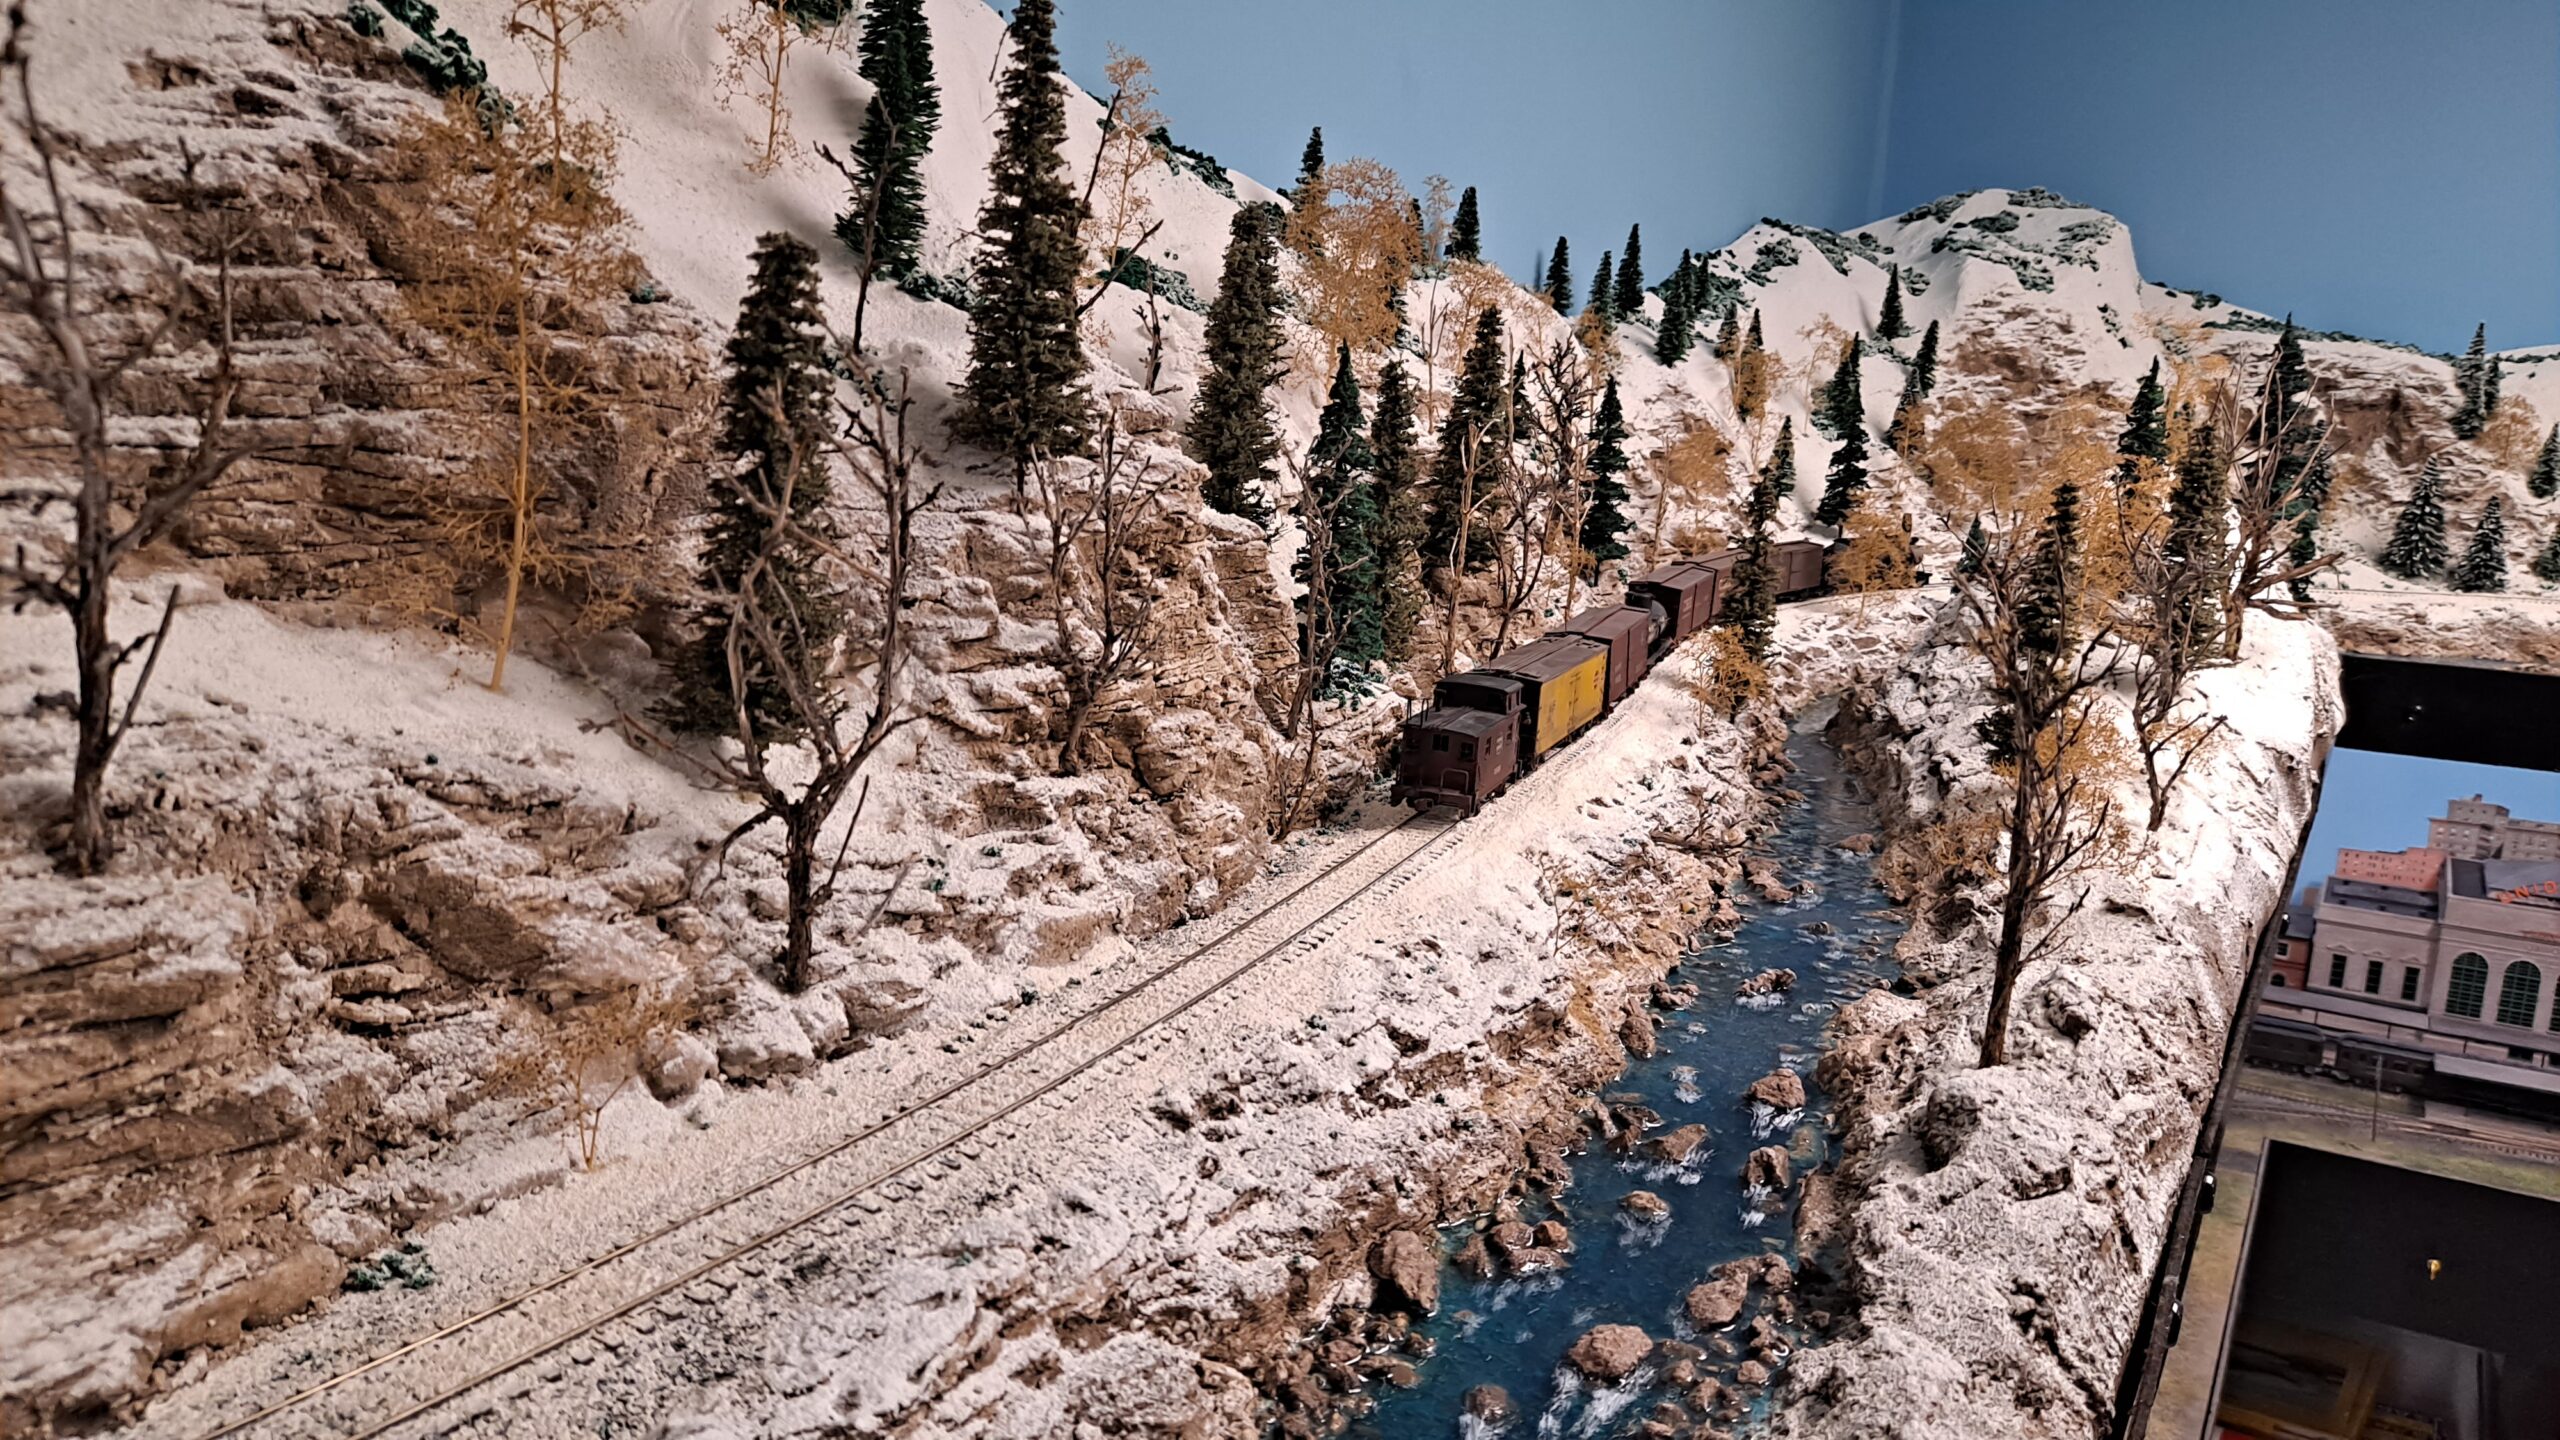 A steam-powered freight train runs through a snowy landscape at the bottom of a rocky canyon along a mountain stream.